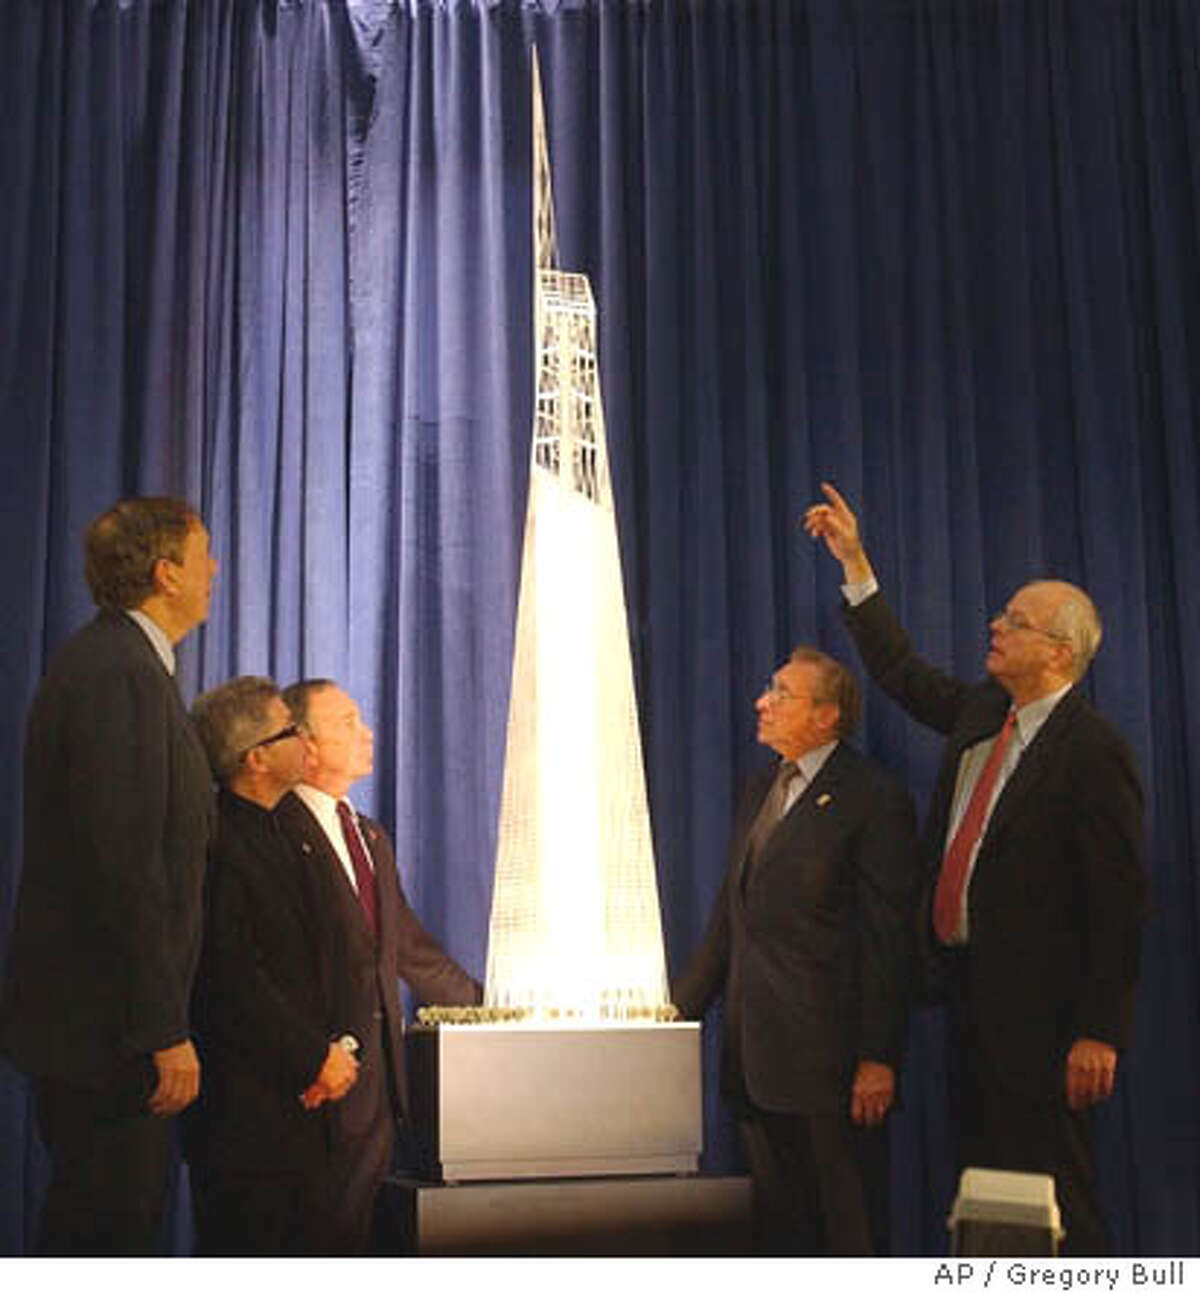 Architect David Childs, right, gestures while looking at a model of the design for the Freedom Tower to be built on the World Trade Center site during an unveiling ceremony in Federal Hall, New York, Friday, Dec. 19, 2003. Looking on, from left, are New York Gov. George Pataki, architect Daniel Libeskind, New York City Mayor Michael Bloomberg, and Larry Silverstein. (AP Photo/Gregory Bull)